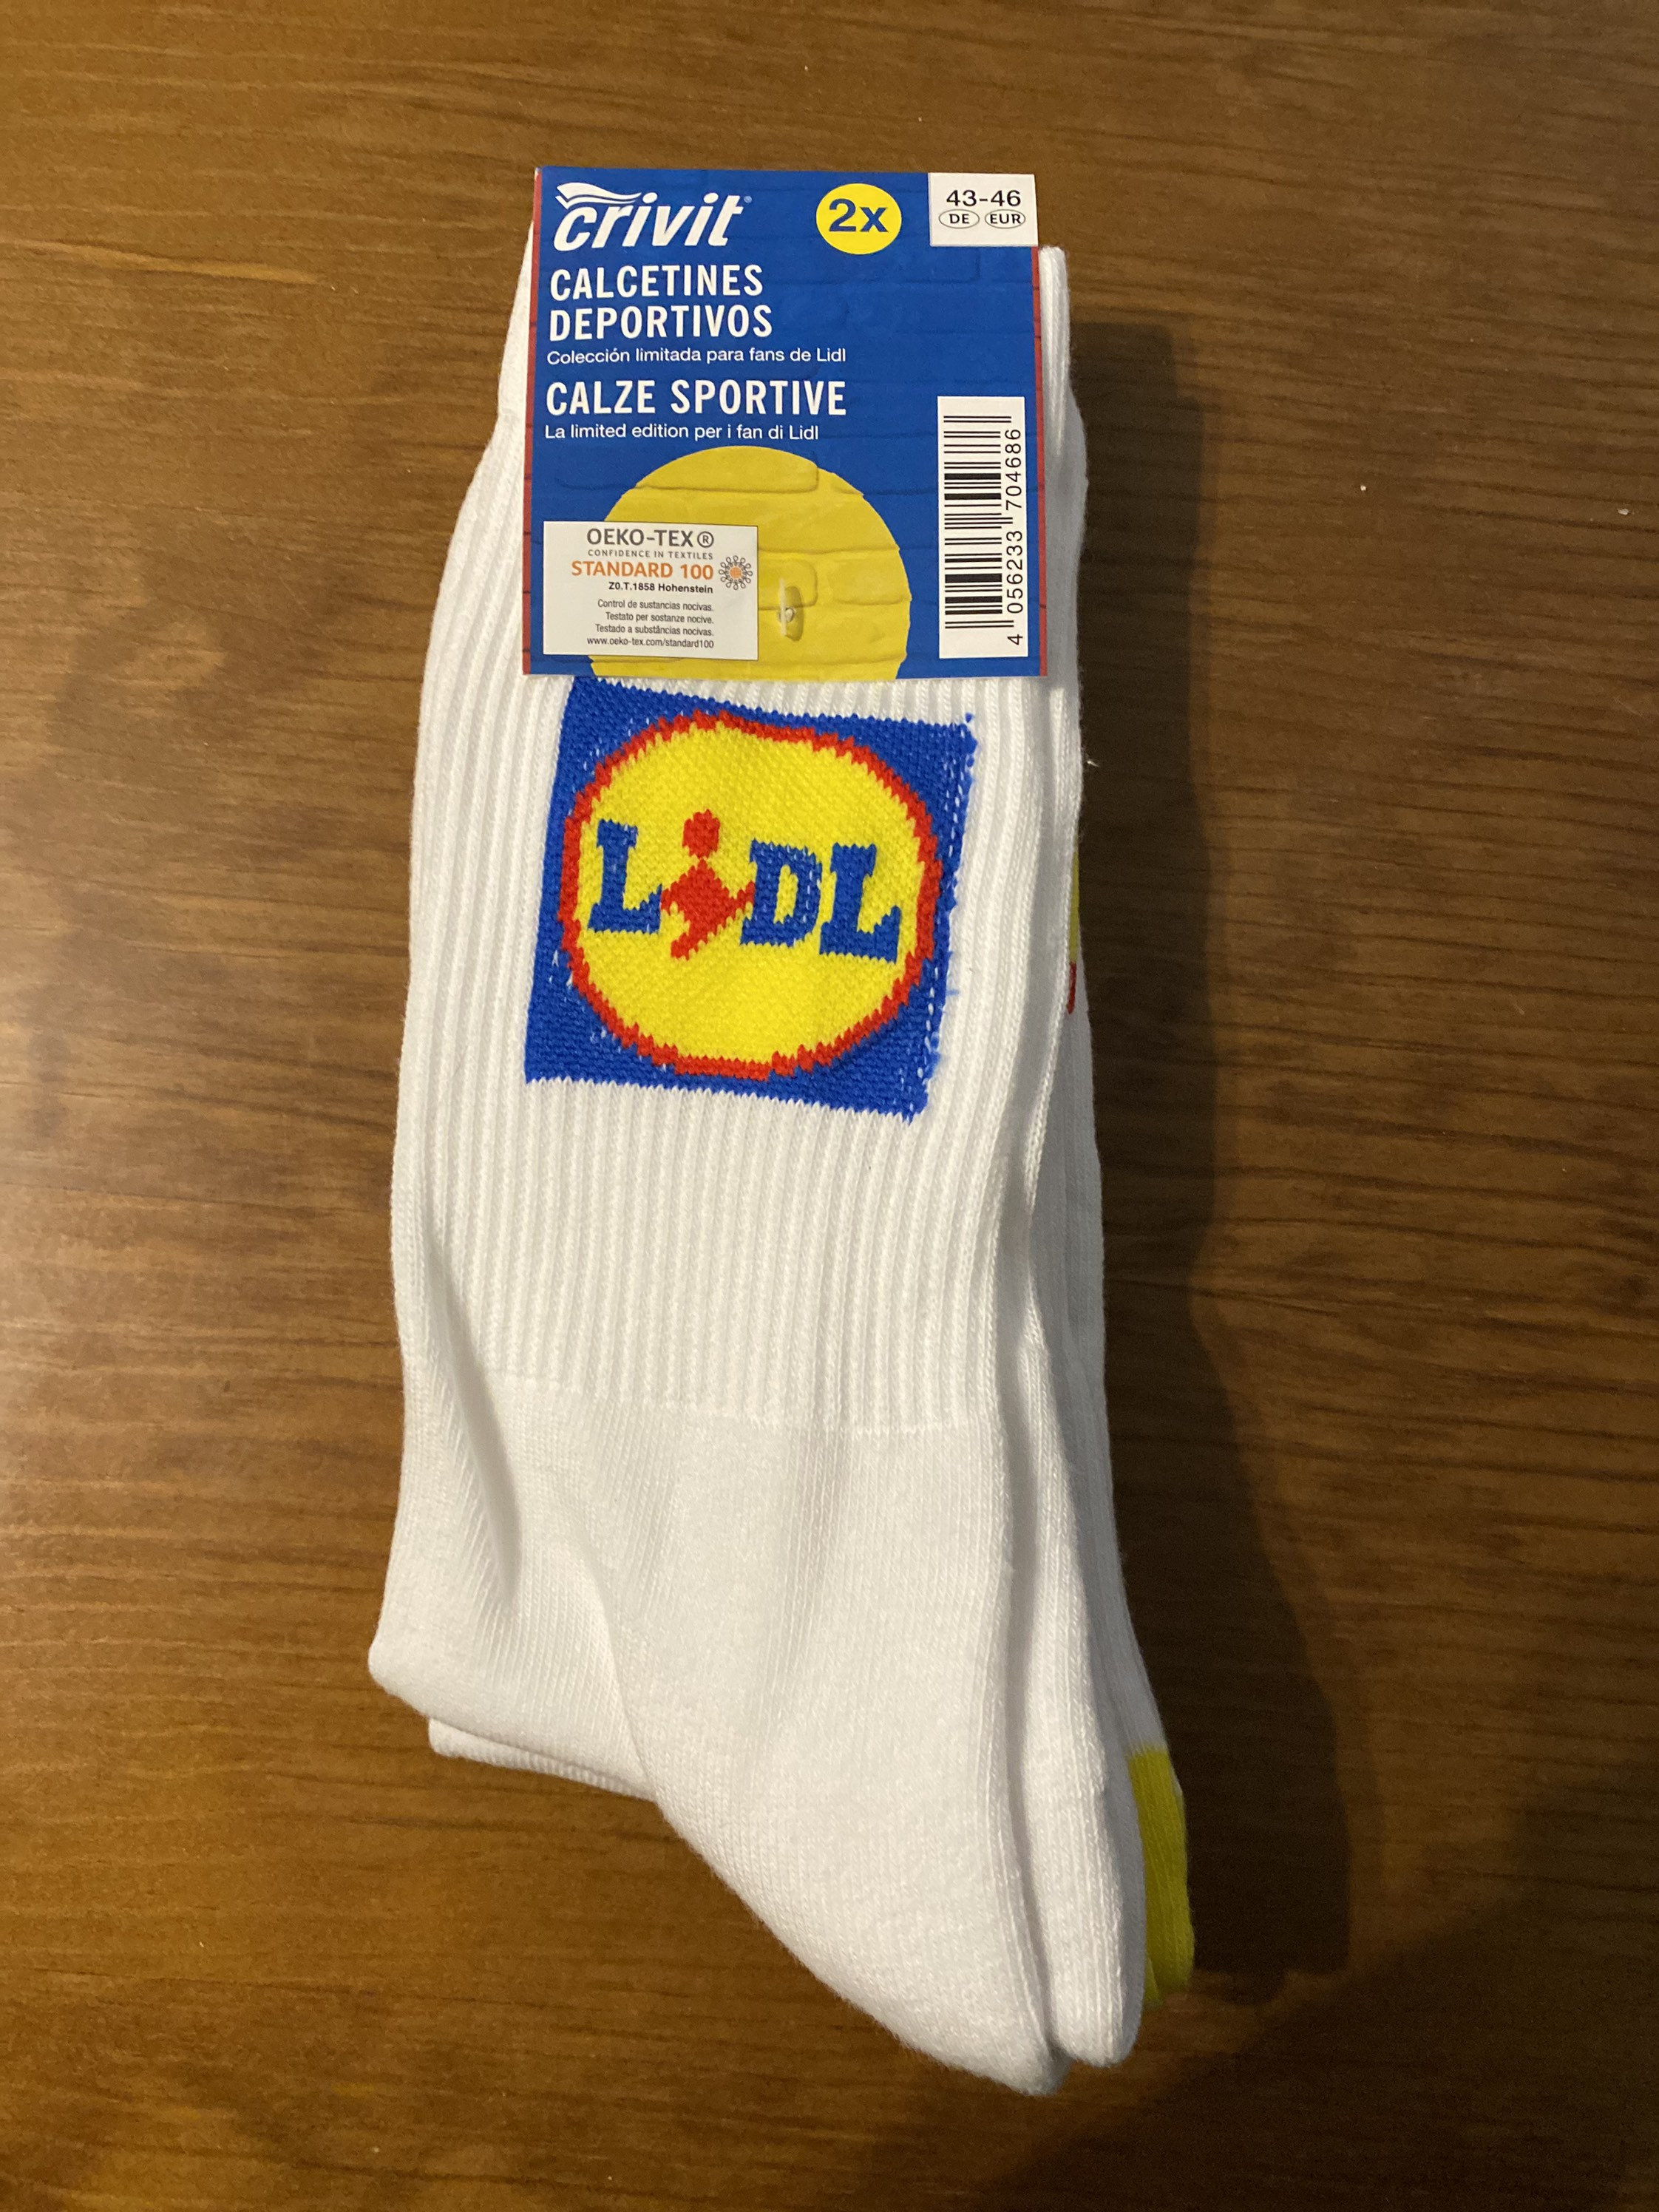 Lidl Trainers Mens Limited Edition 2023 Shoes New Size U.K. 9